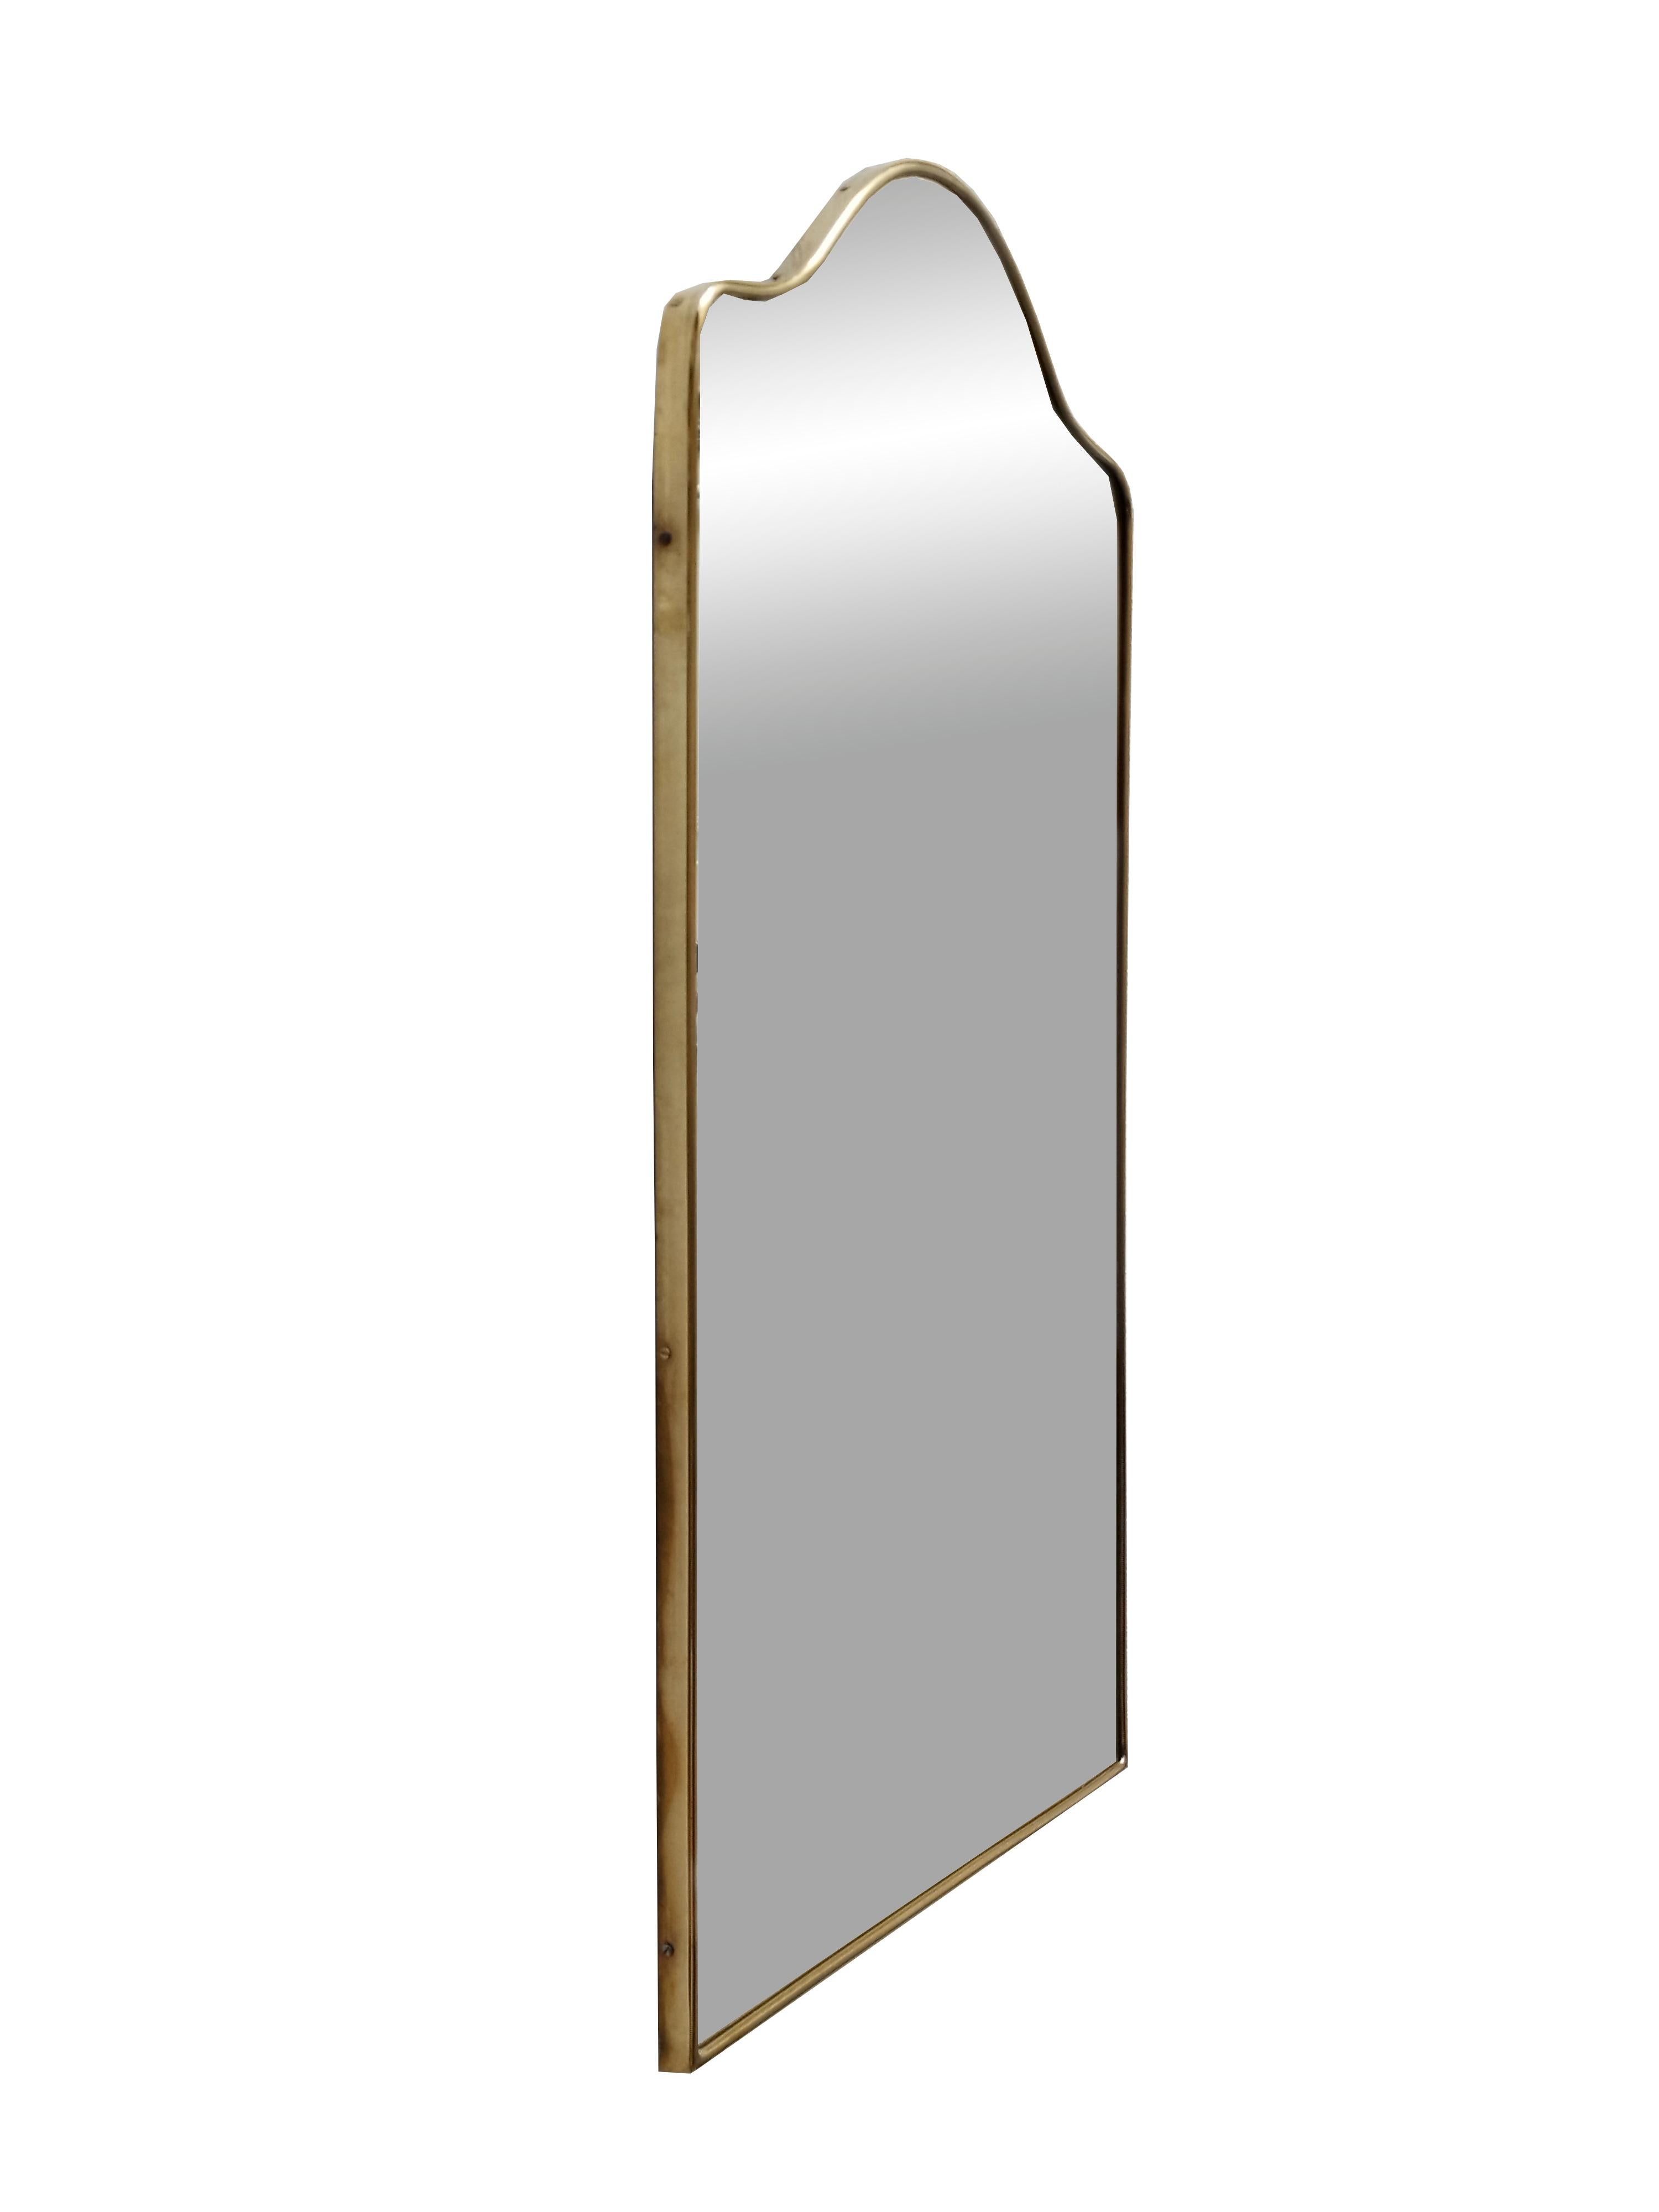 Wall mirror with brass frame, made in the 1960s in the style of Giò Ponti. The frame shows some signs of time.

